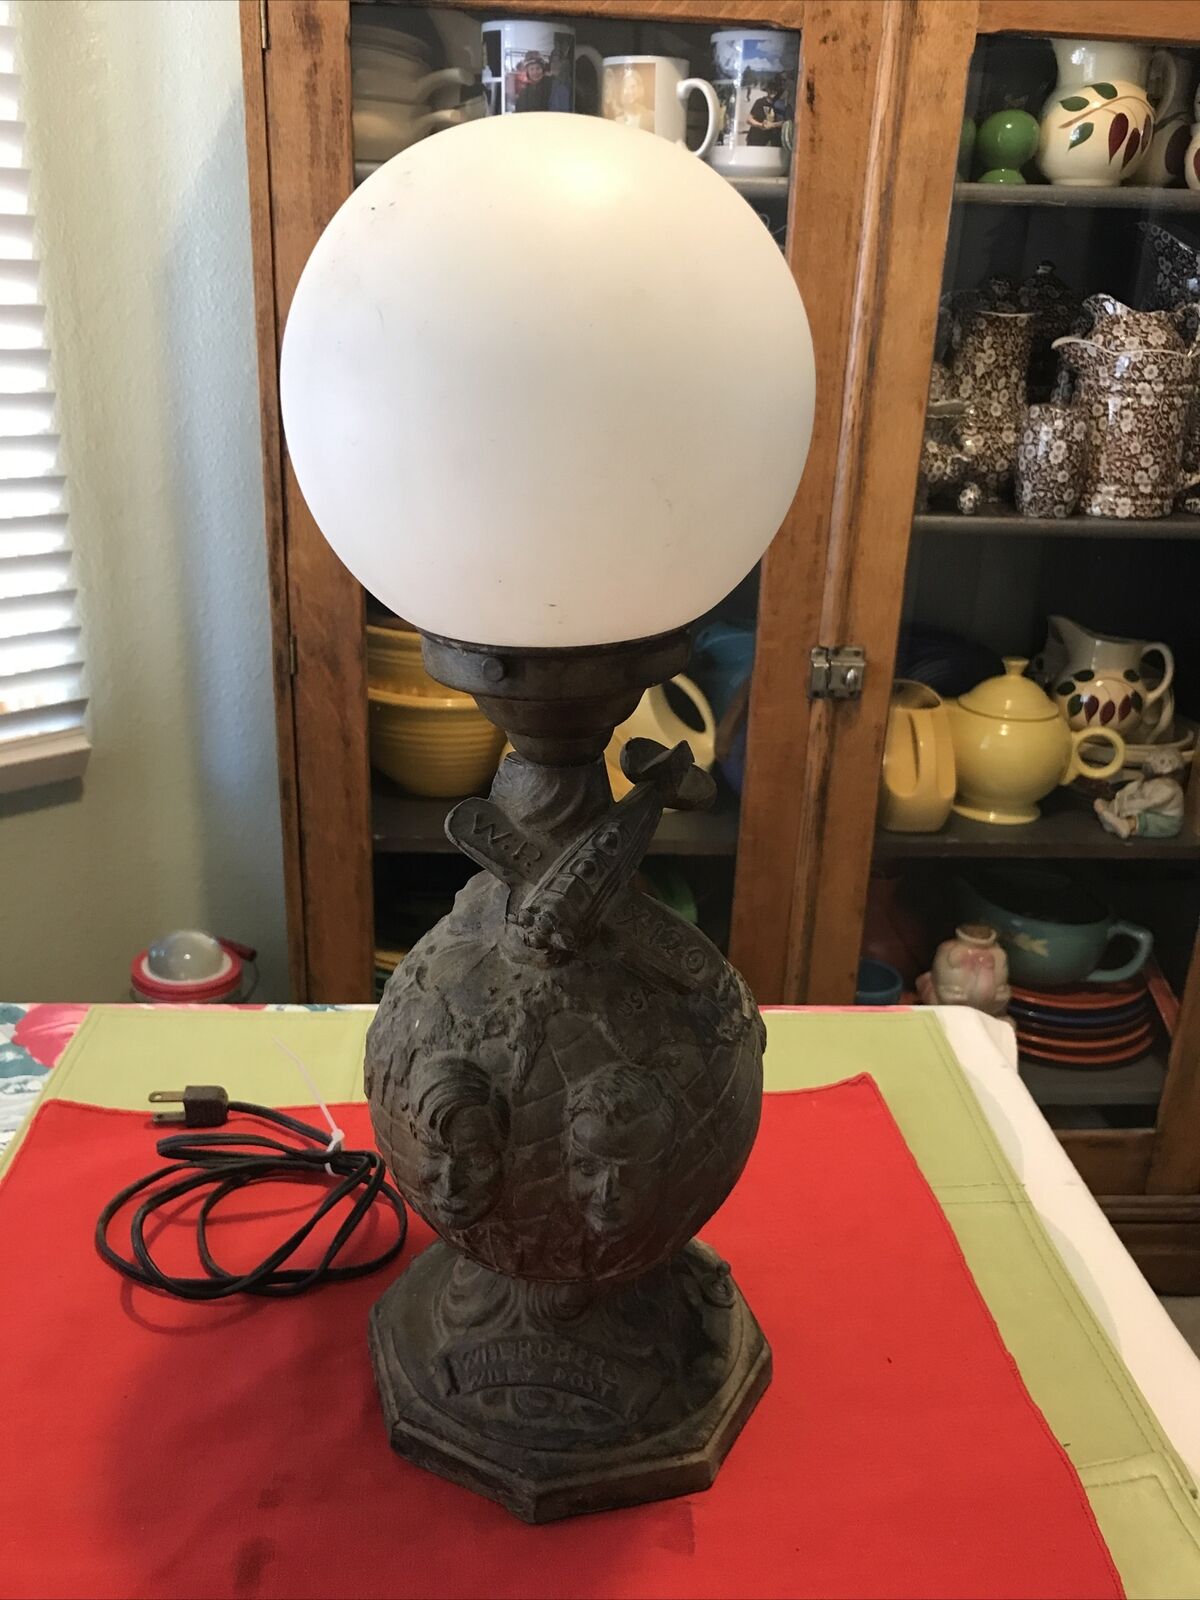 Rare 1935 WILEY POST & WILL ROGERS COMMEMORATIVE AVIATION GLOBE LAMP WORKS